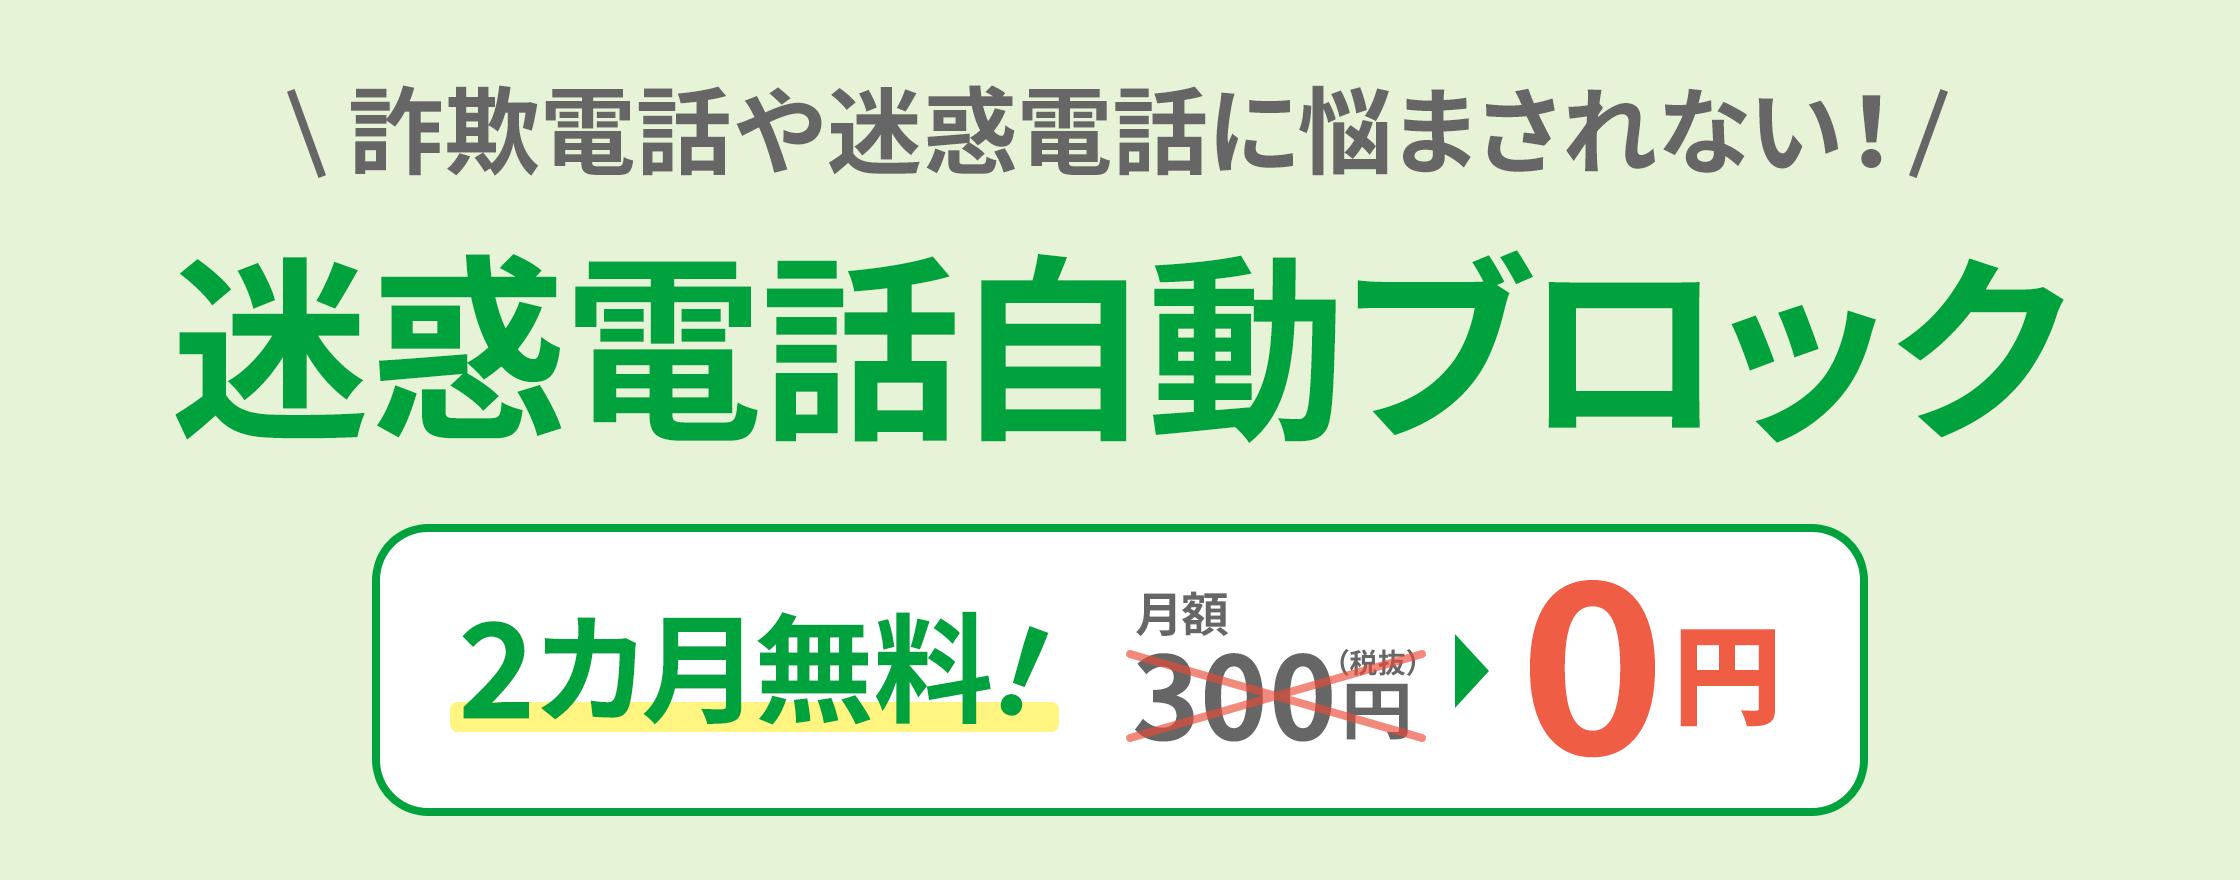 Don't be annoyed by scam calls or nuisance calls! Spam call automatic block 2 months free! 300 yen per month (excluding tax) → 0 yen